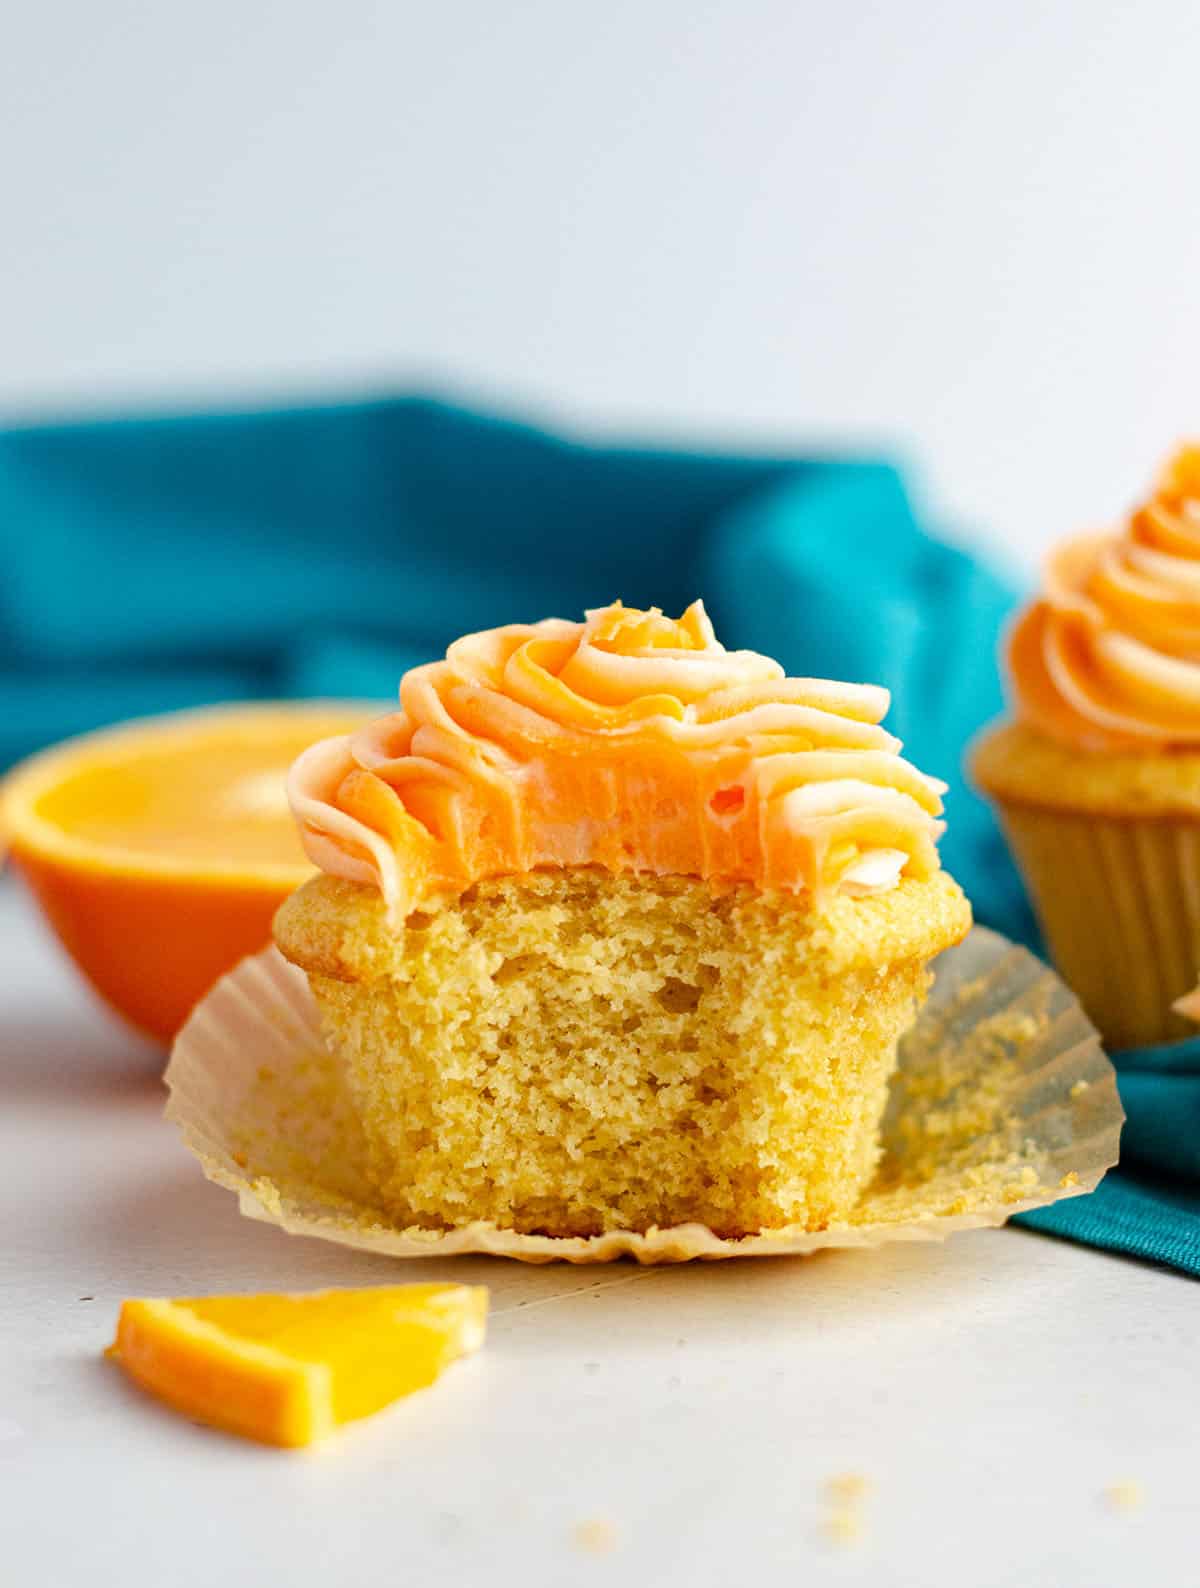 Orange Creamsicle Cupcakes: Simple orange cupcakes topped with swirls of orange and cream cheese frostings.